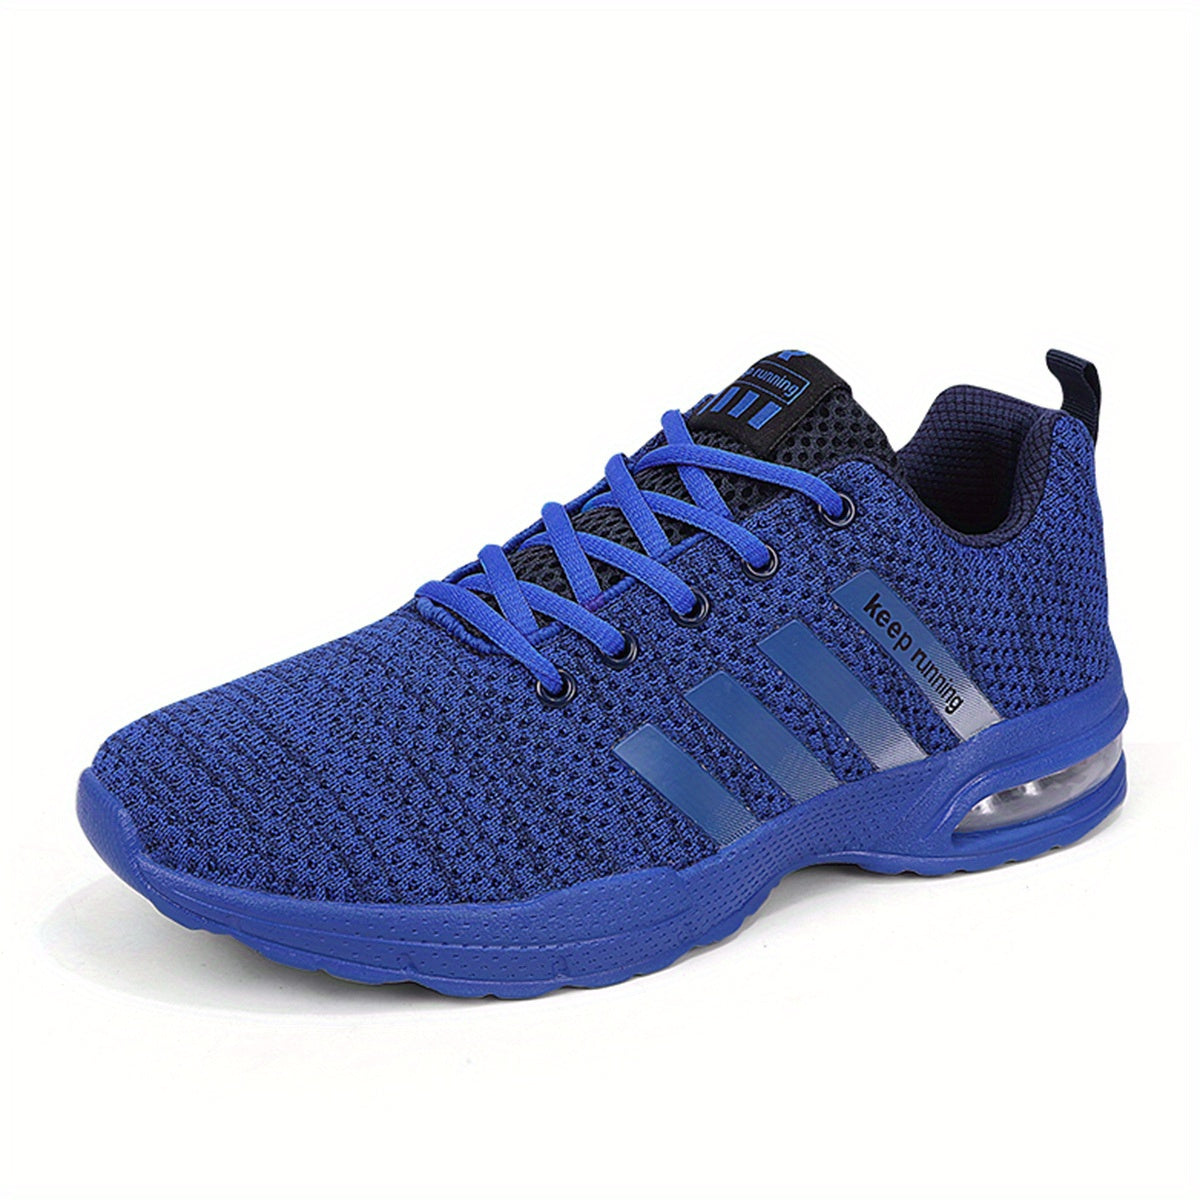 Lace-up Sneakers With Air Cushion, Striped Athletic Shoes